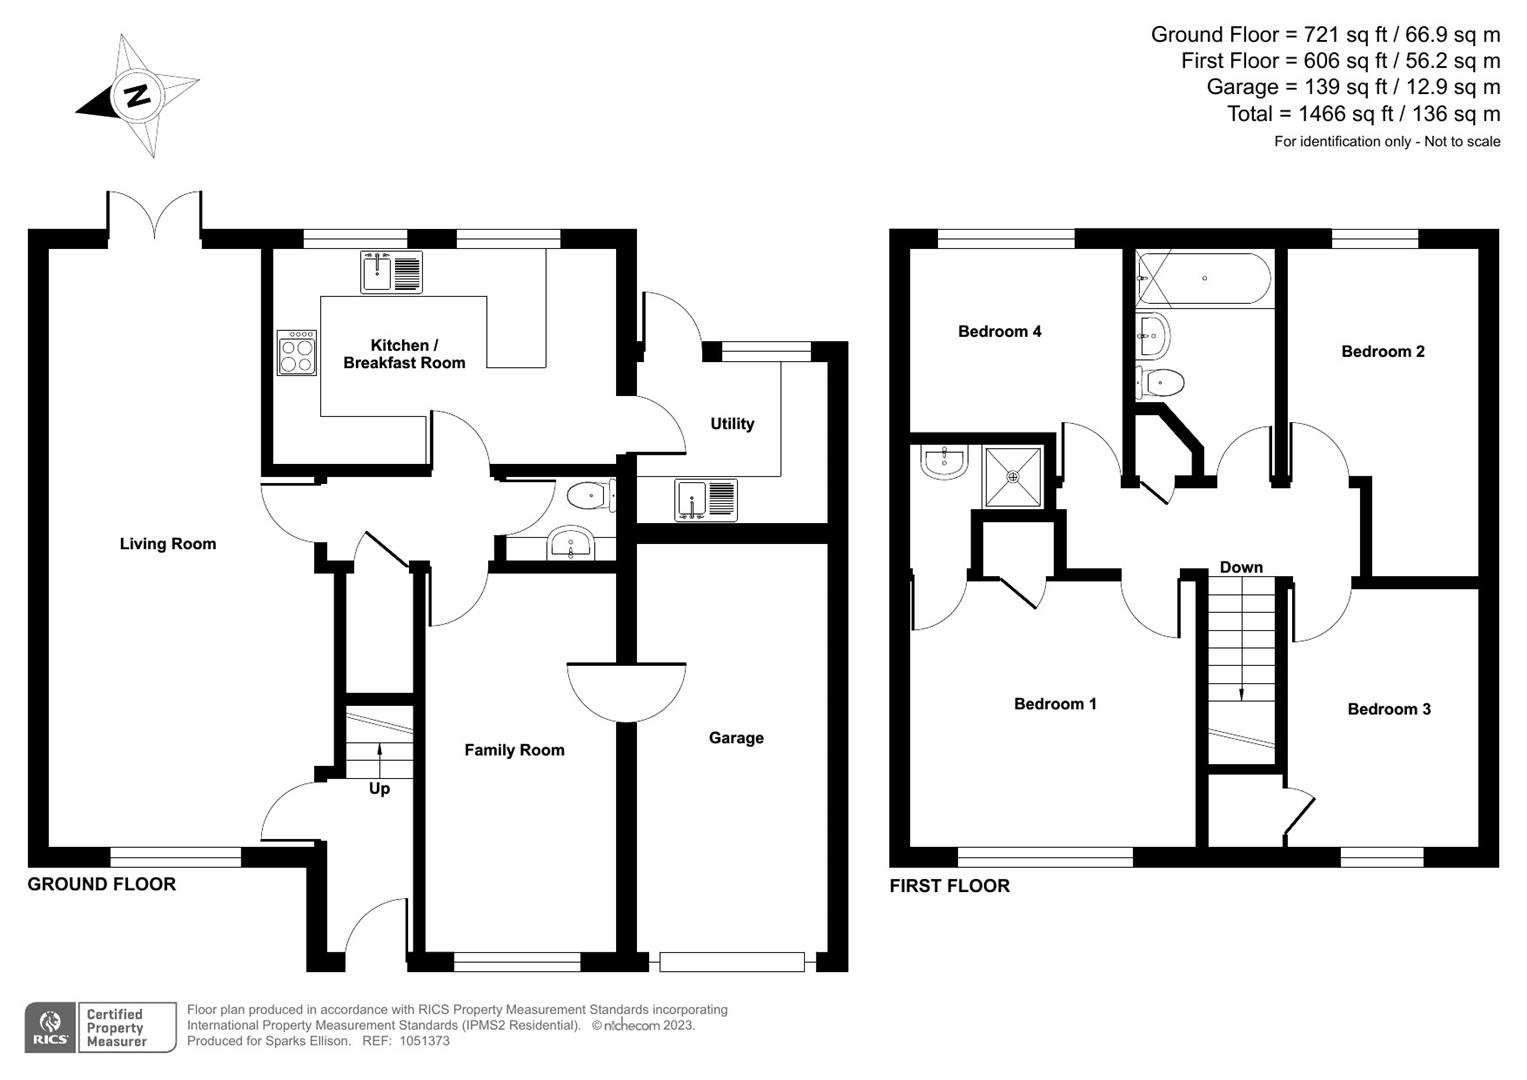 Charlecote Drive, Noth Millers Dale, Chandler’s Ford floorplan